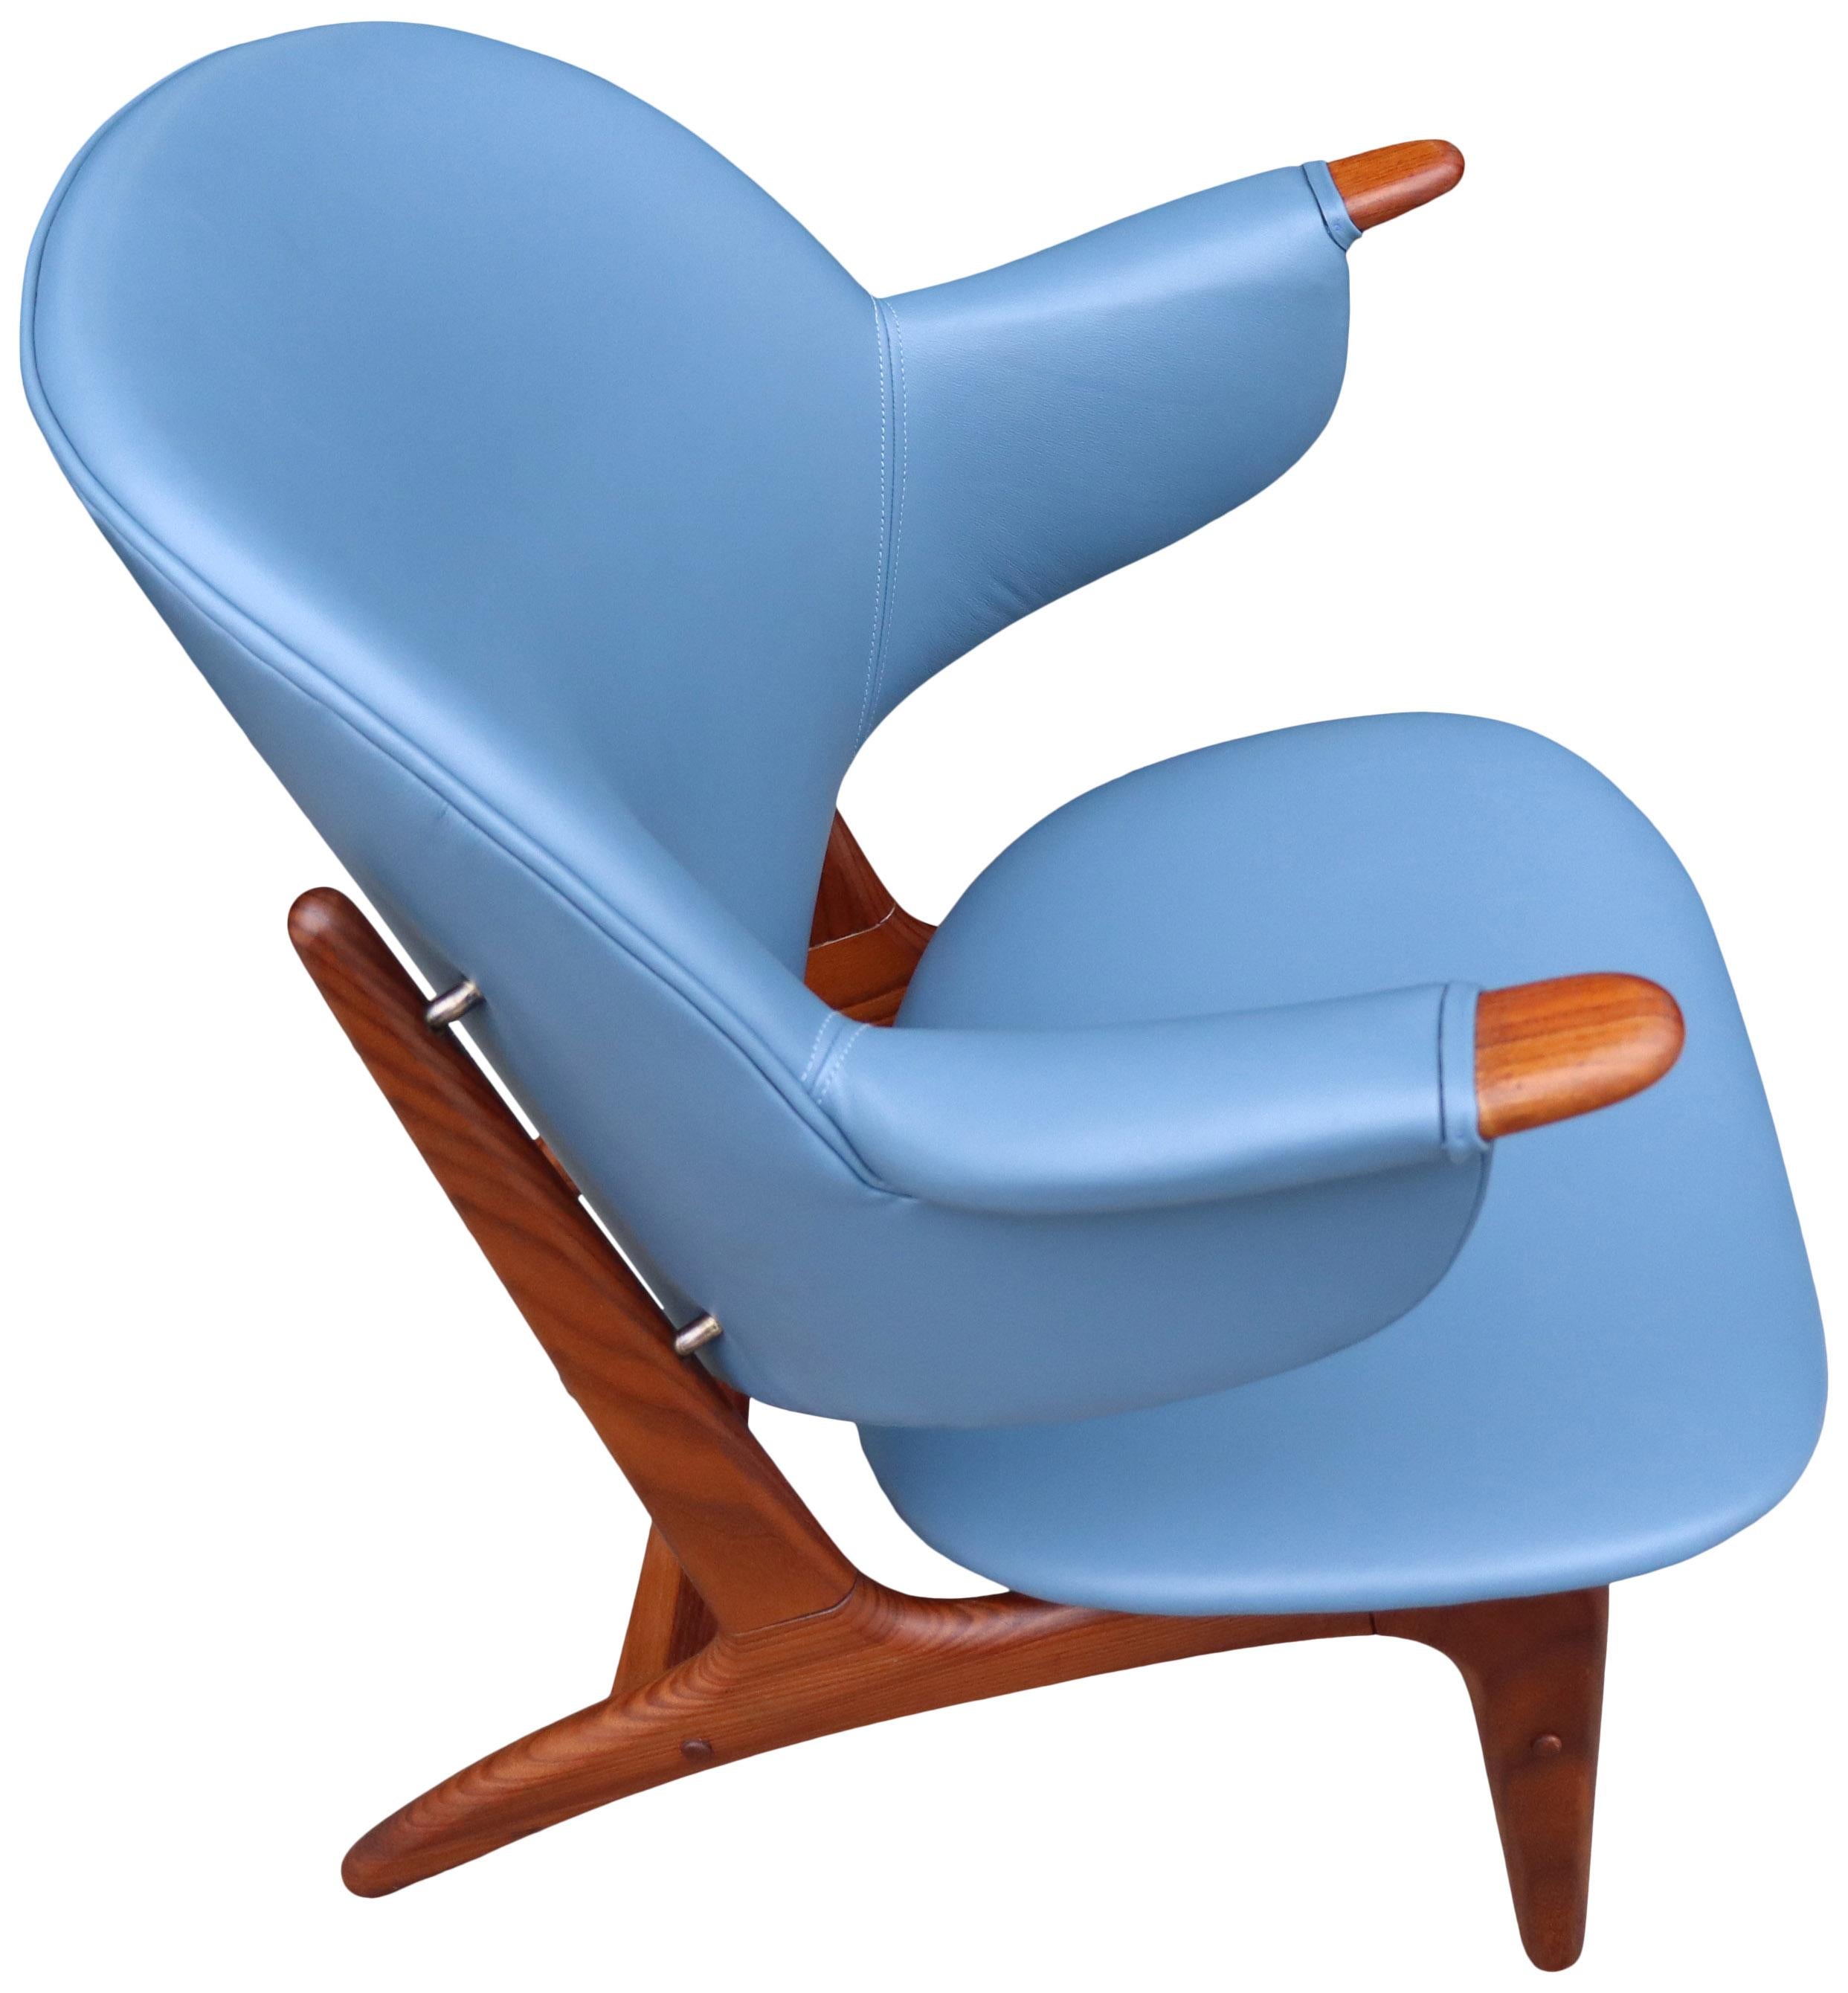 For your consideration is this incredibly rare lounge chair by Arne Hovmand-Olsen. Newly recovered in luxurious leather. This rather petite lounge chair fits perfectly into the human form. Often referred to the baby Papa bear chair referring to